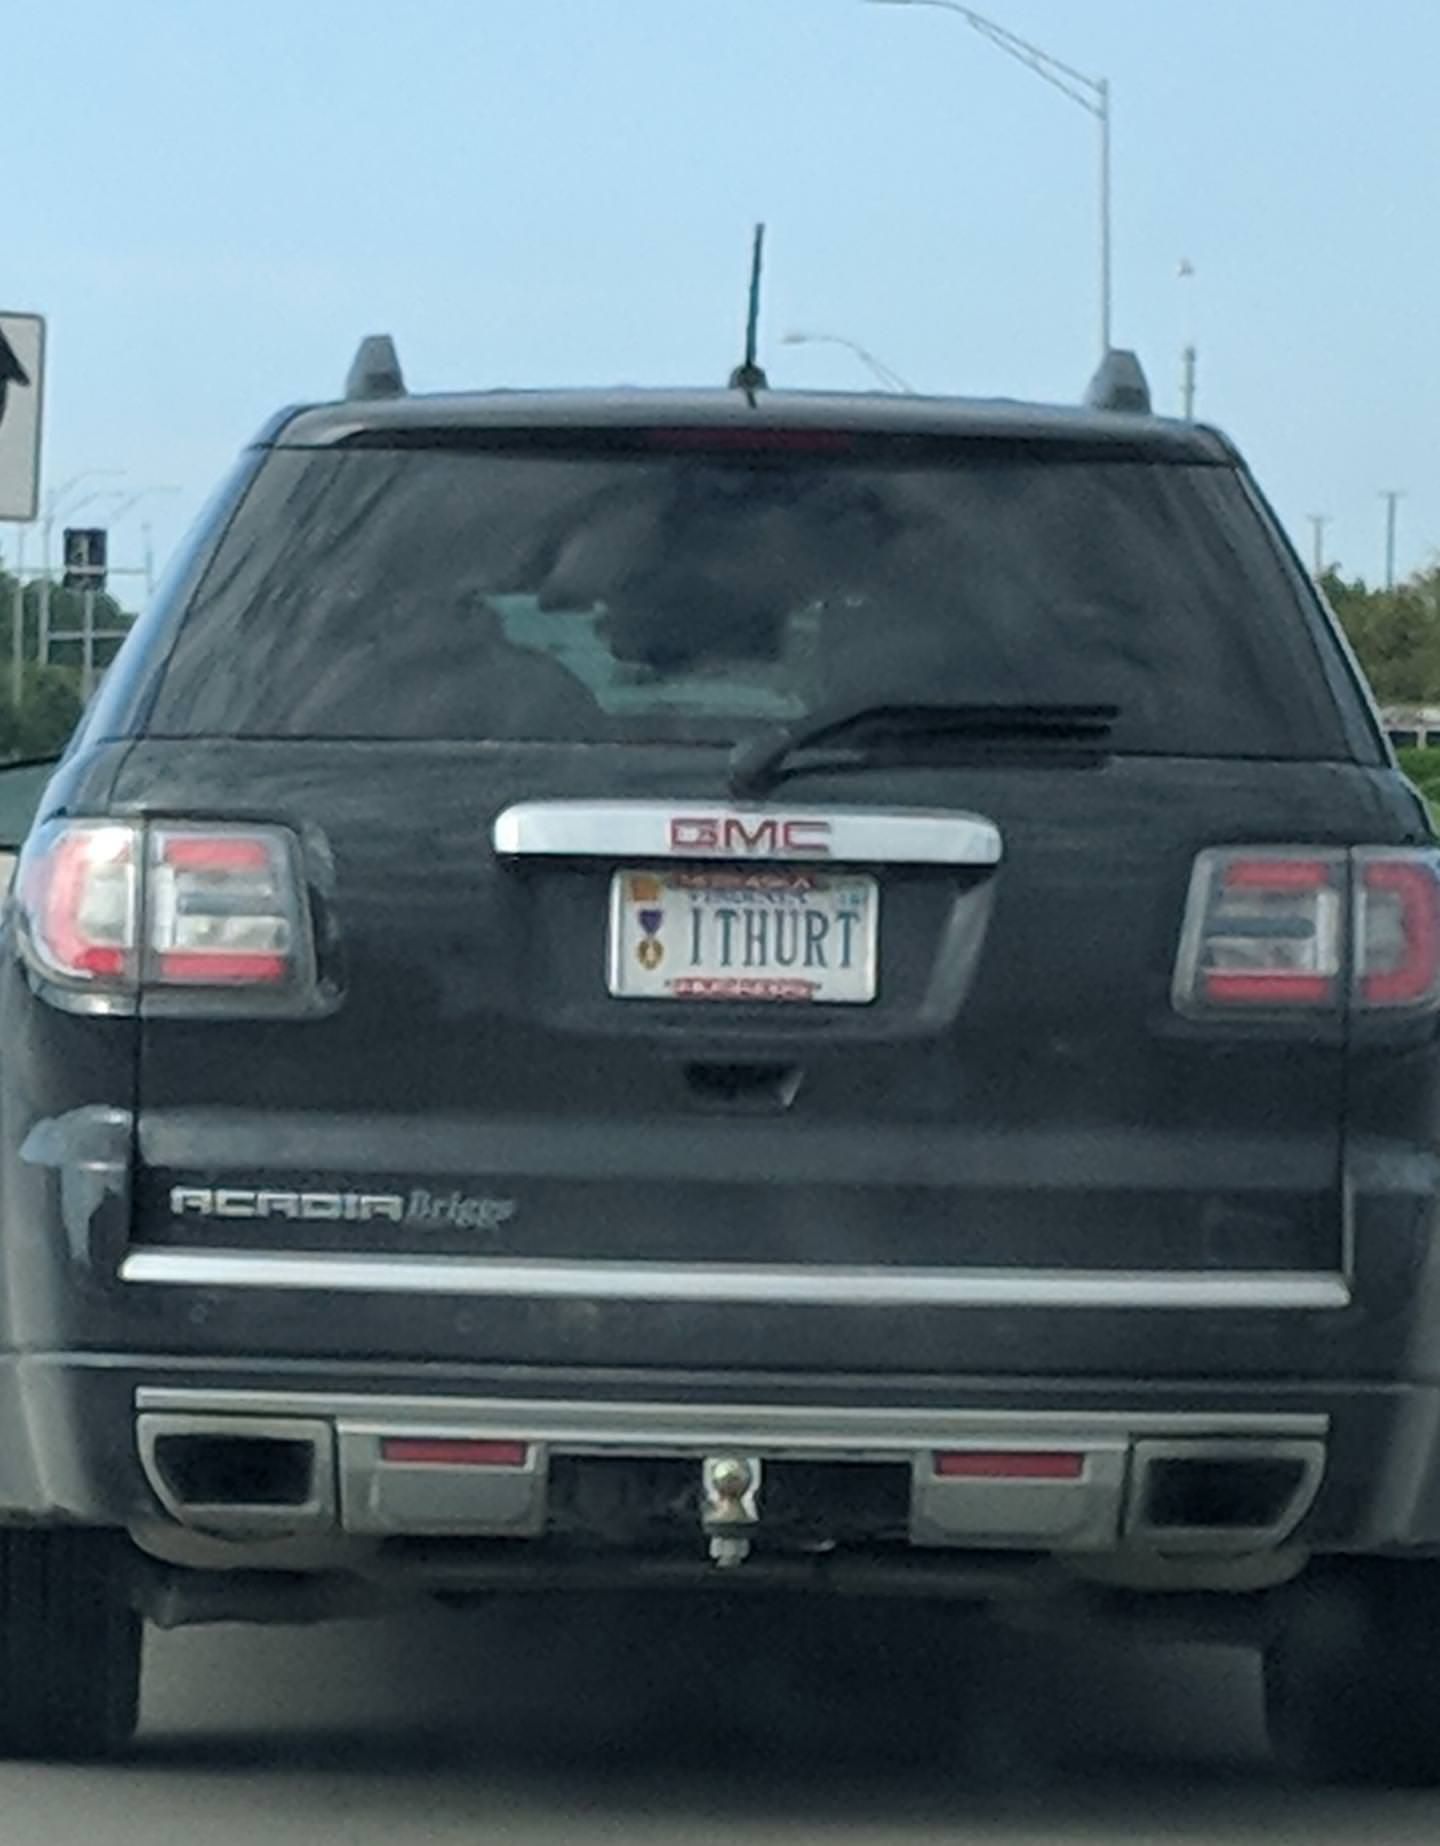 Saw this license plate with a Purple Heart on it...